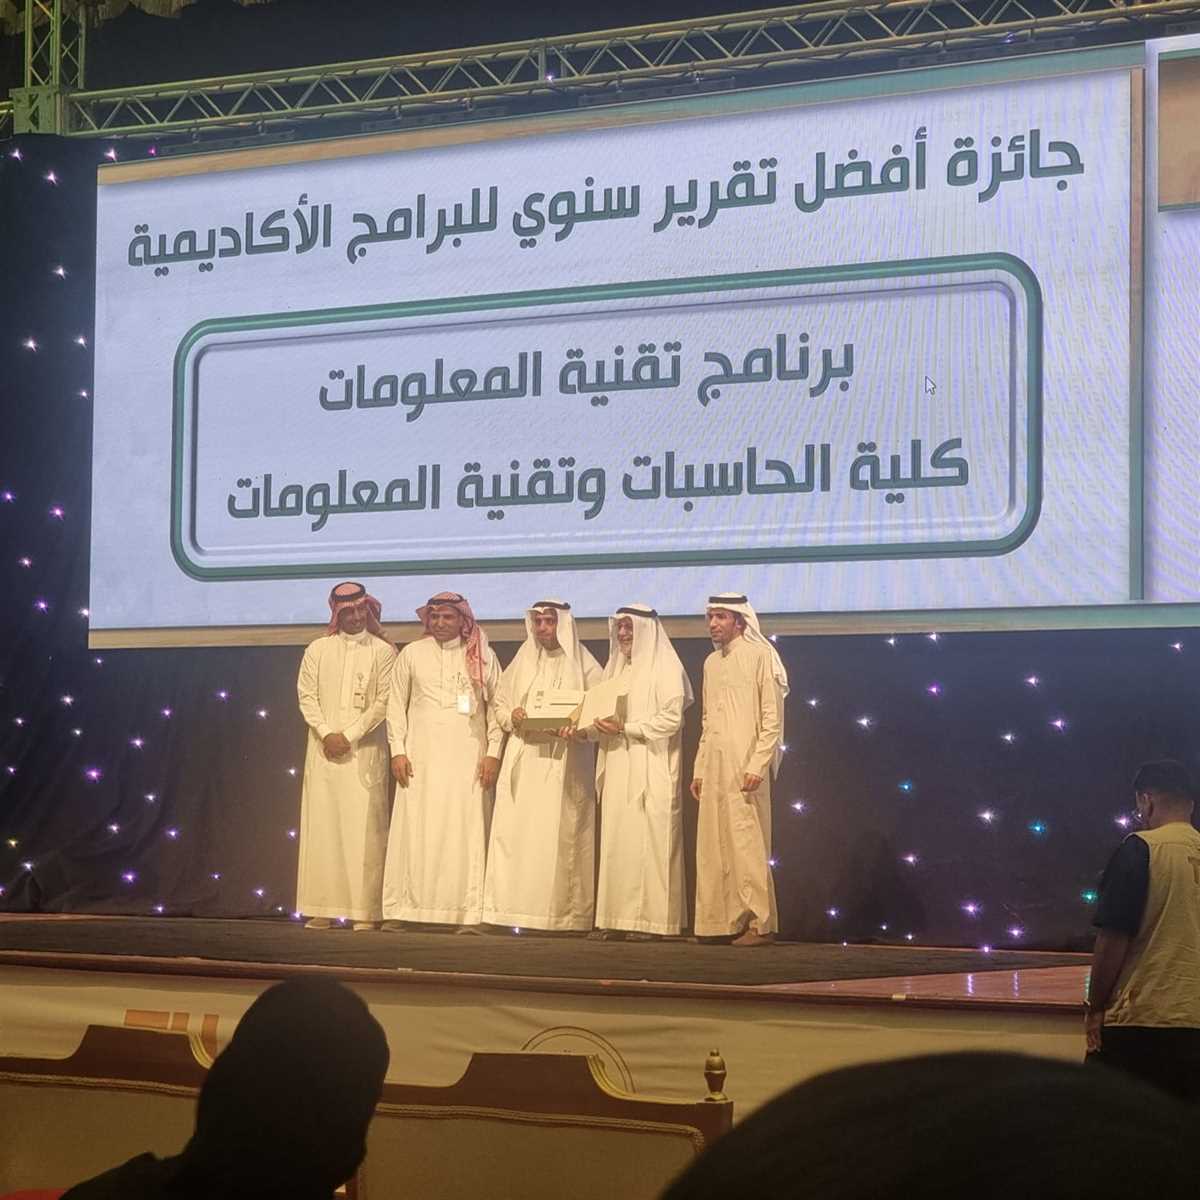 The Information Technology Program won the award for the best annual report in the celebration of the International Quality Day at Taif University